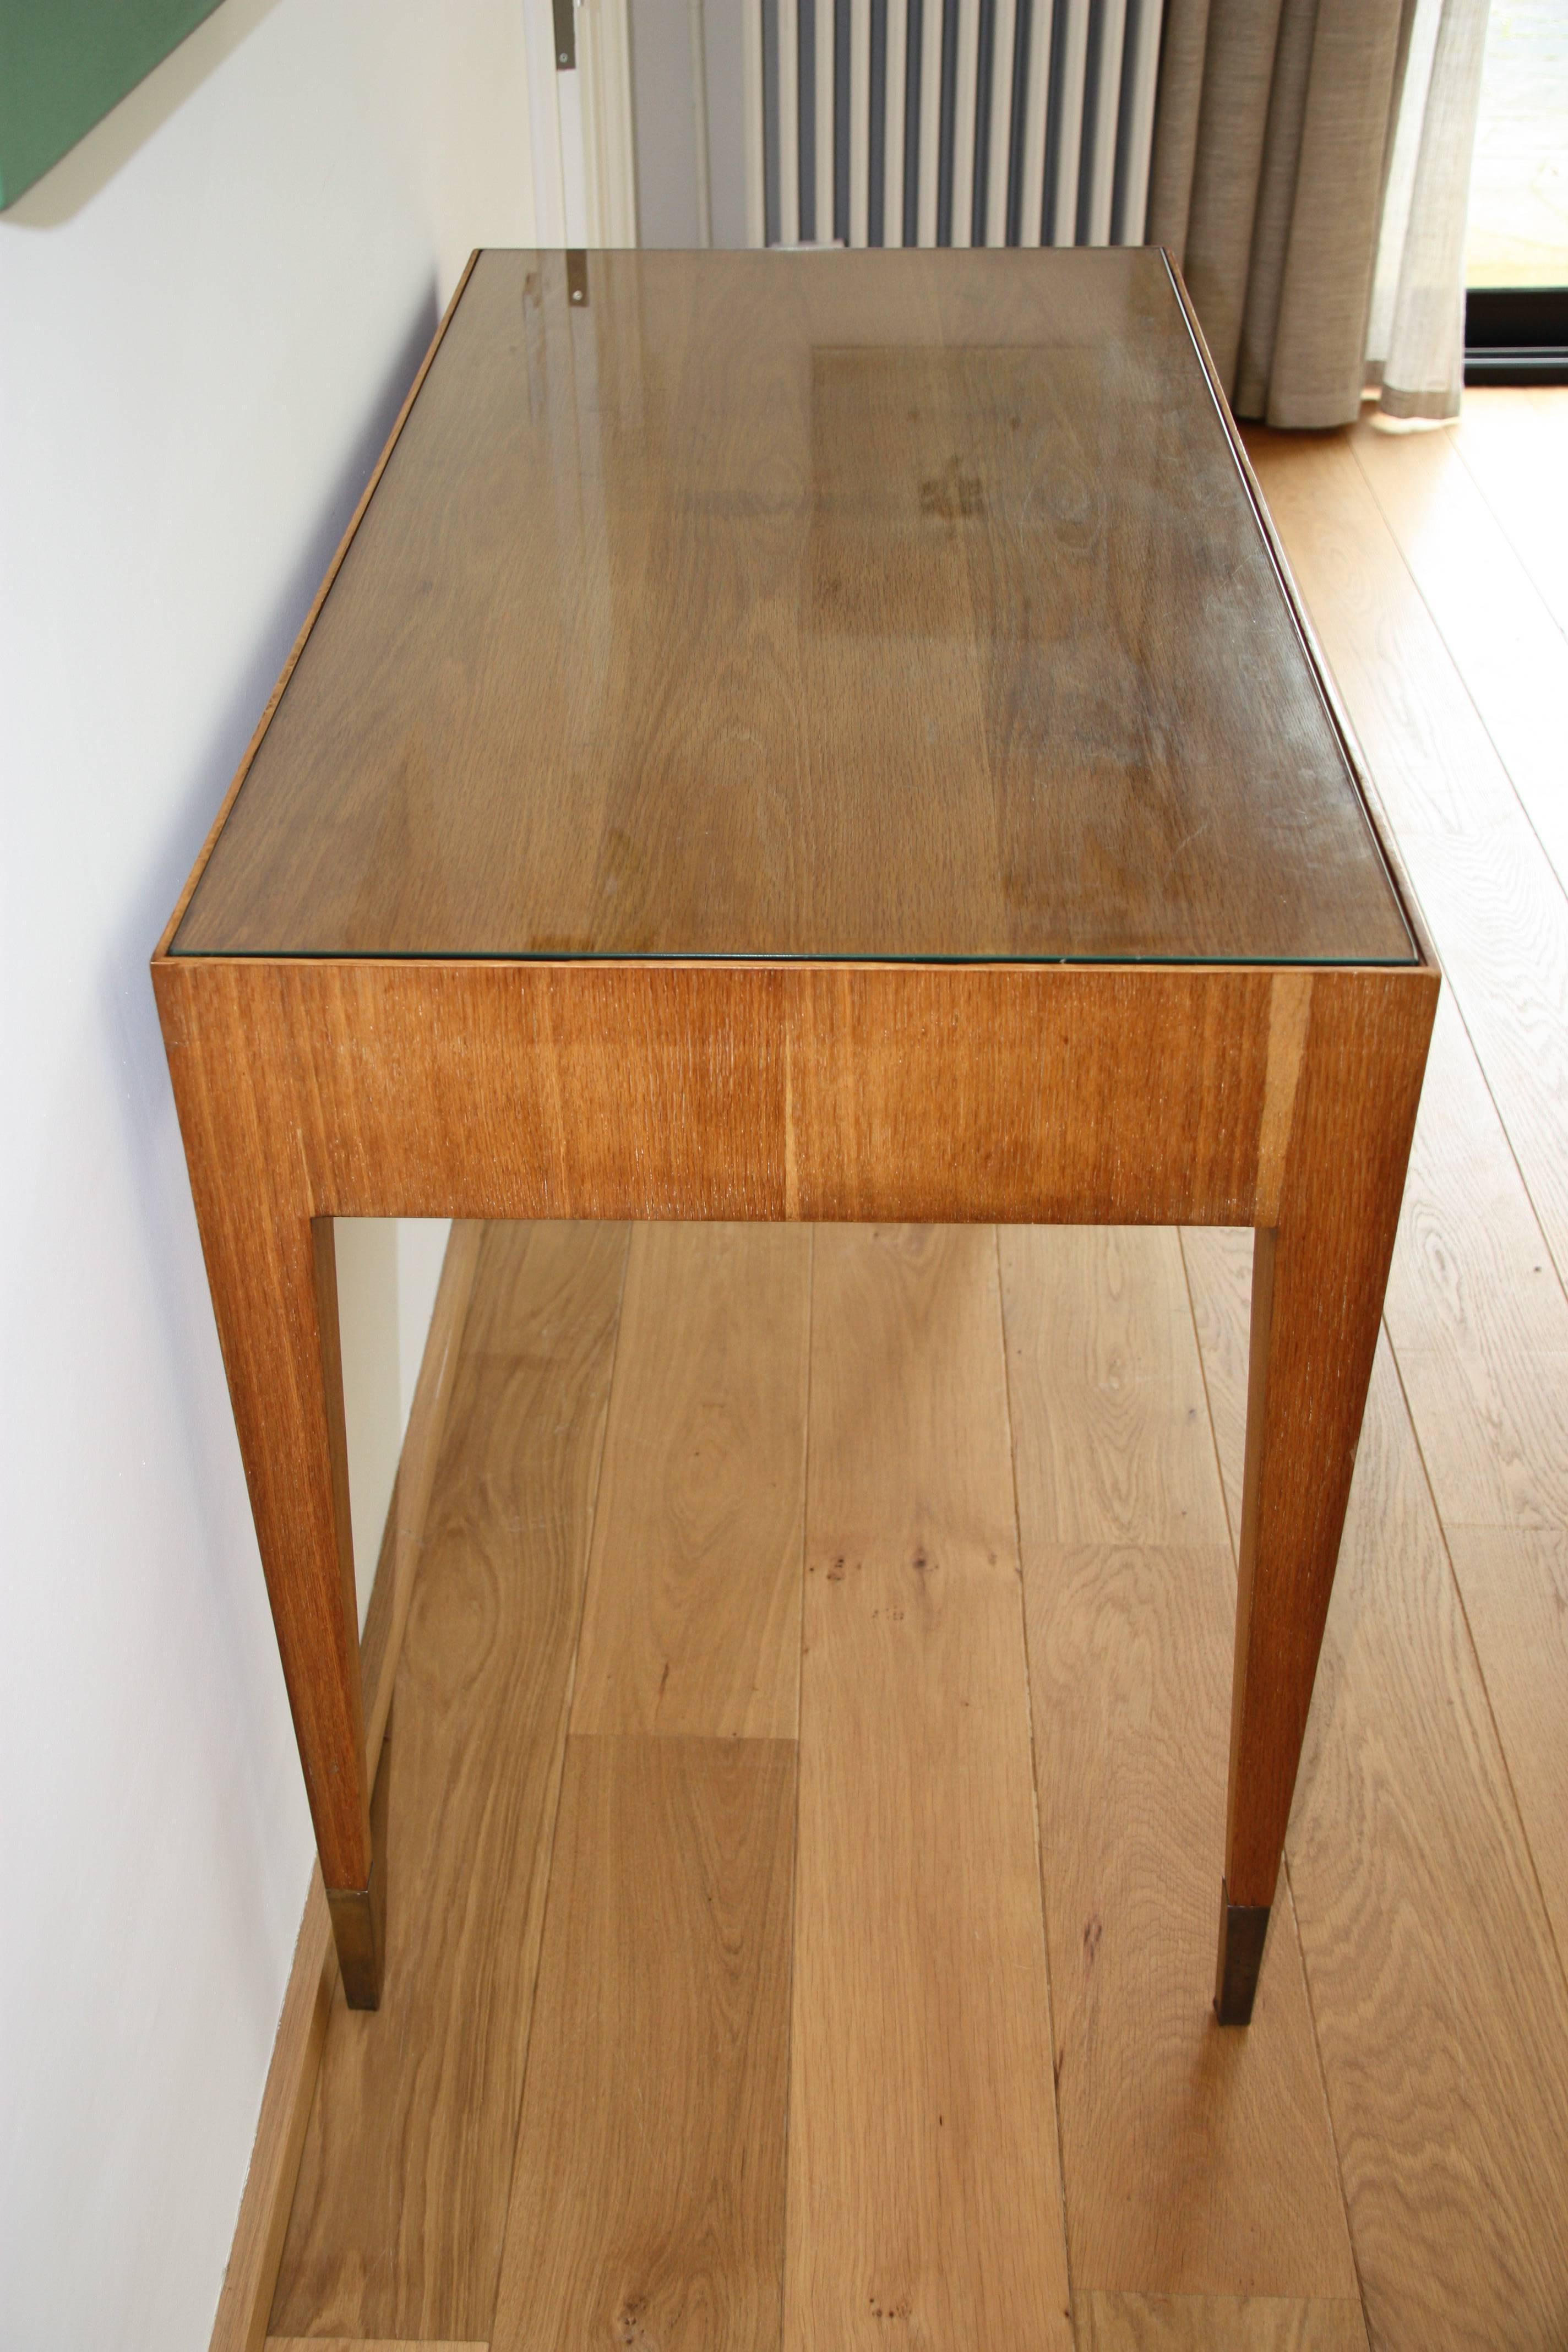 Mid-20th Century Italian Vintage Clear Oak Desk with Drawers by Gio Ponti, circa 1950 For Sale